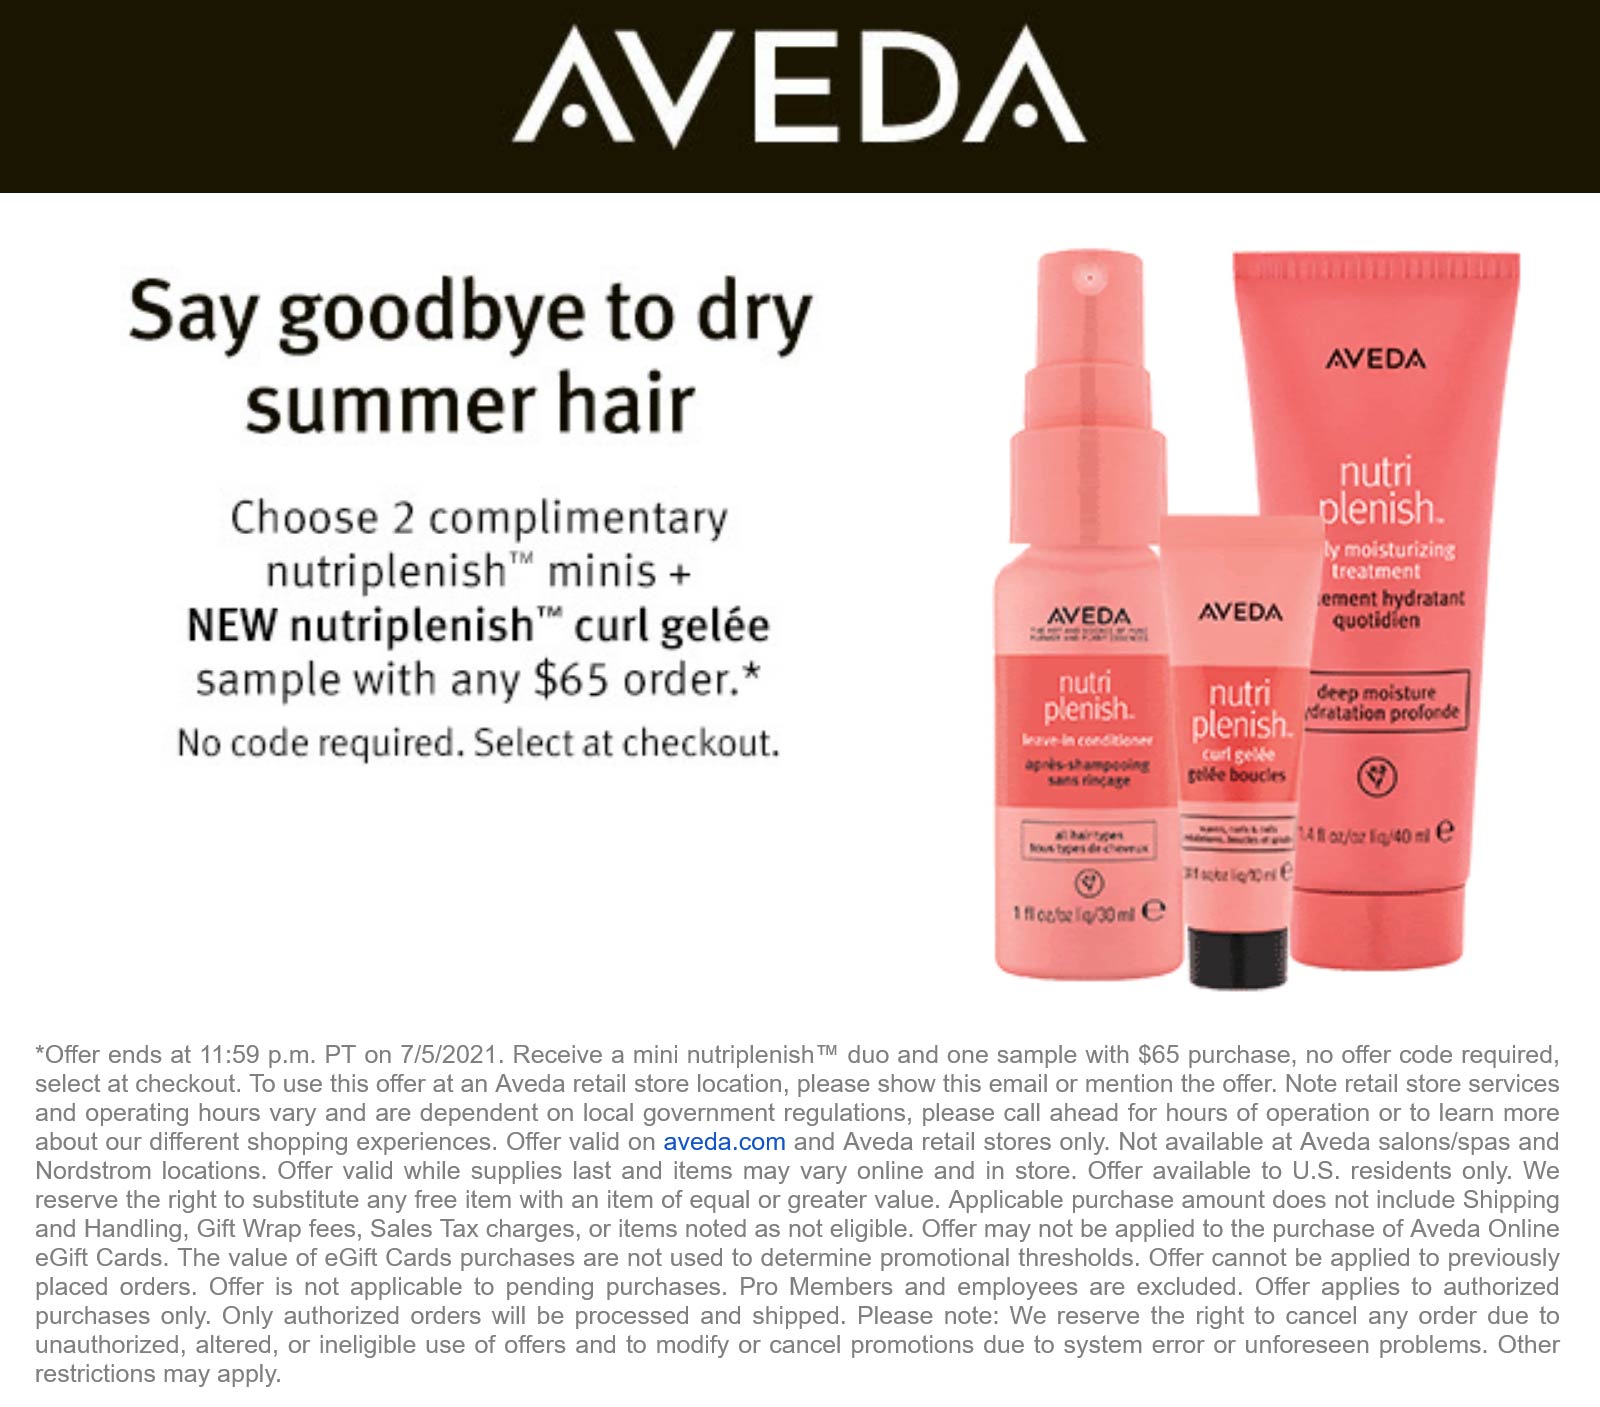 2 free nutriplenish with 65 spent at AVEDA aveda The Coupons App®